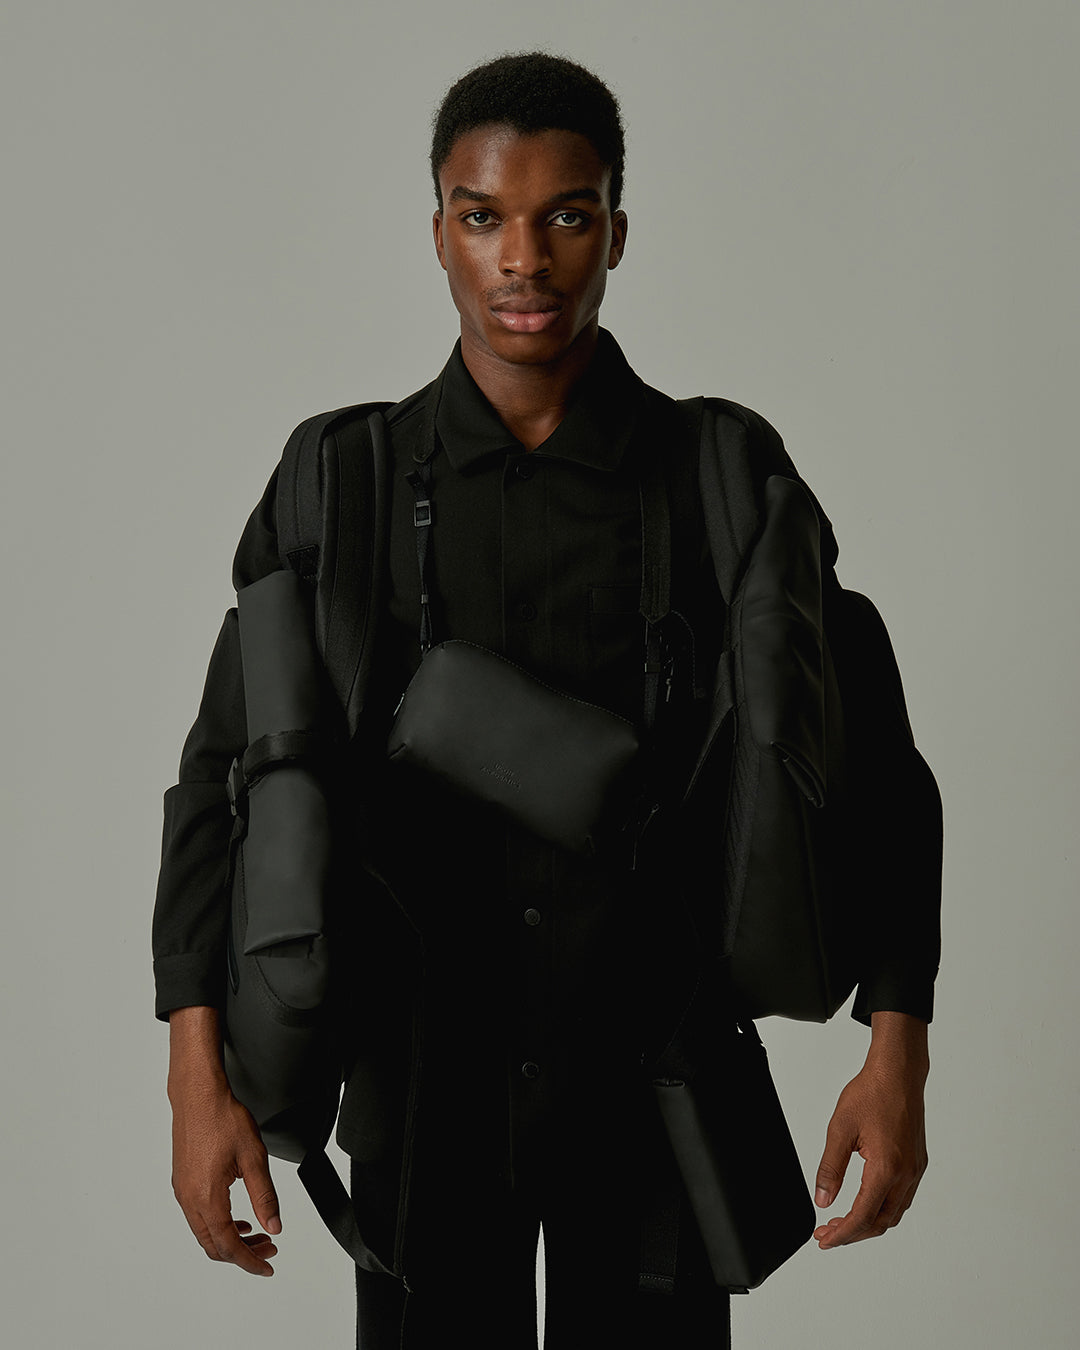 Sale • Up to 50% off • Minimalistic backpacks from Ucon Acrobatics